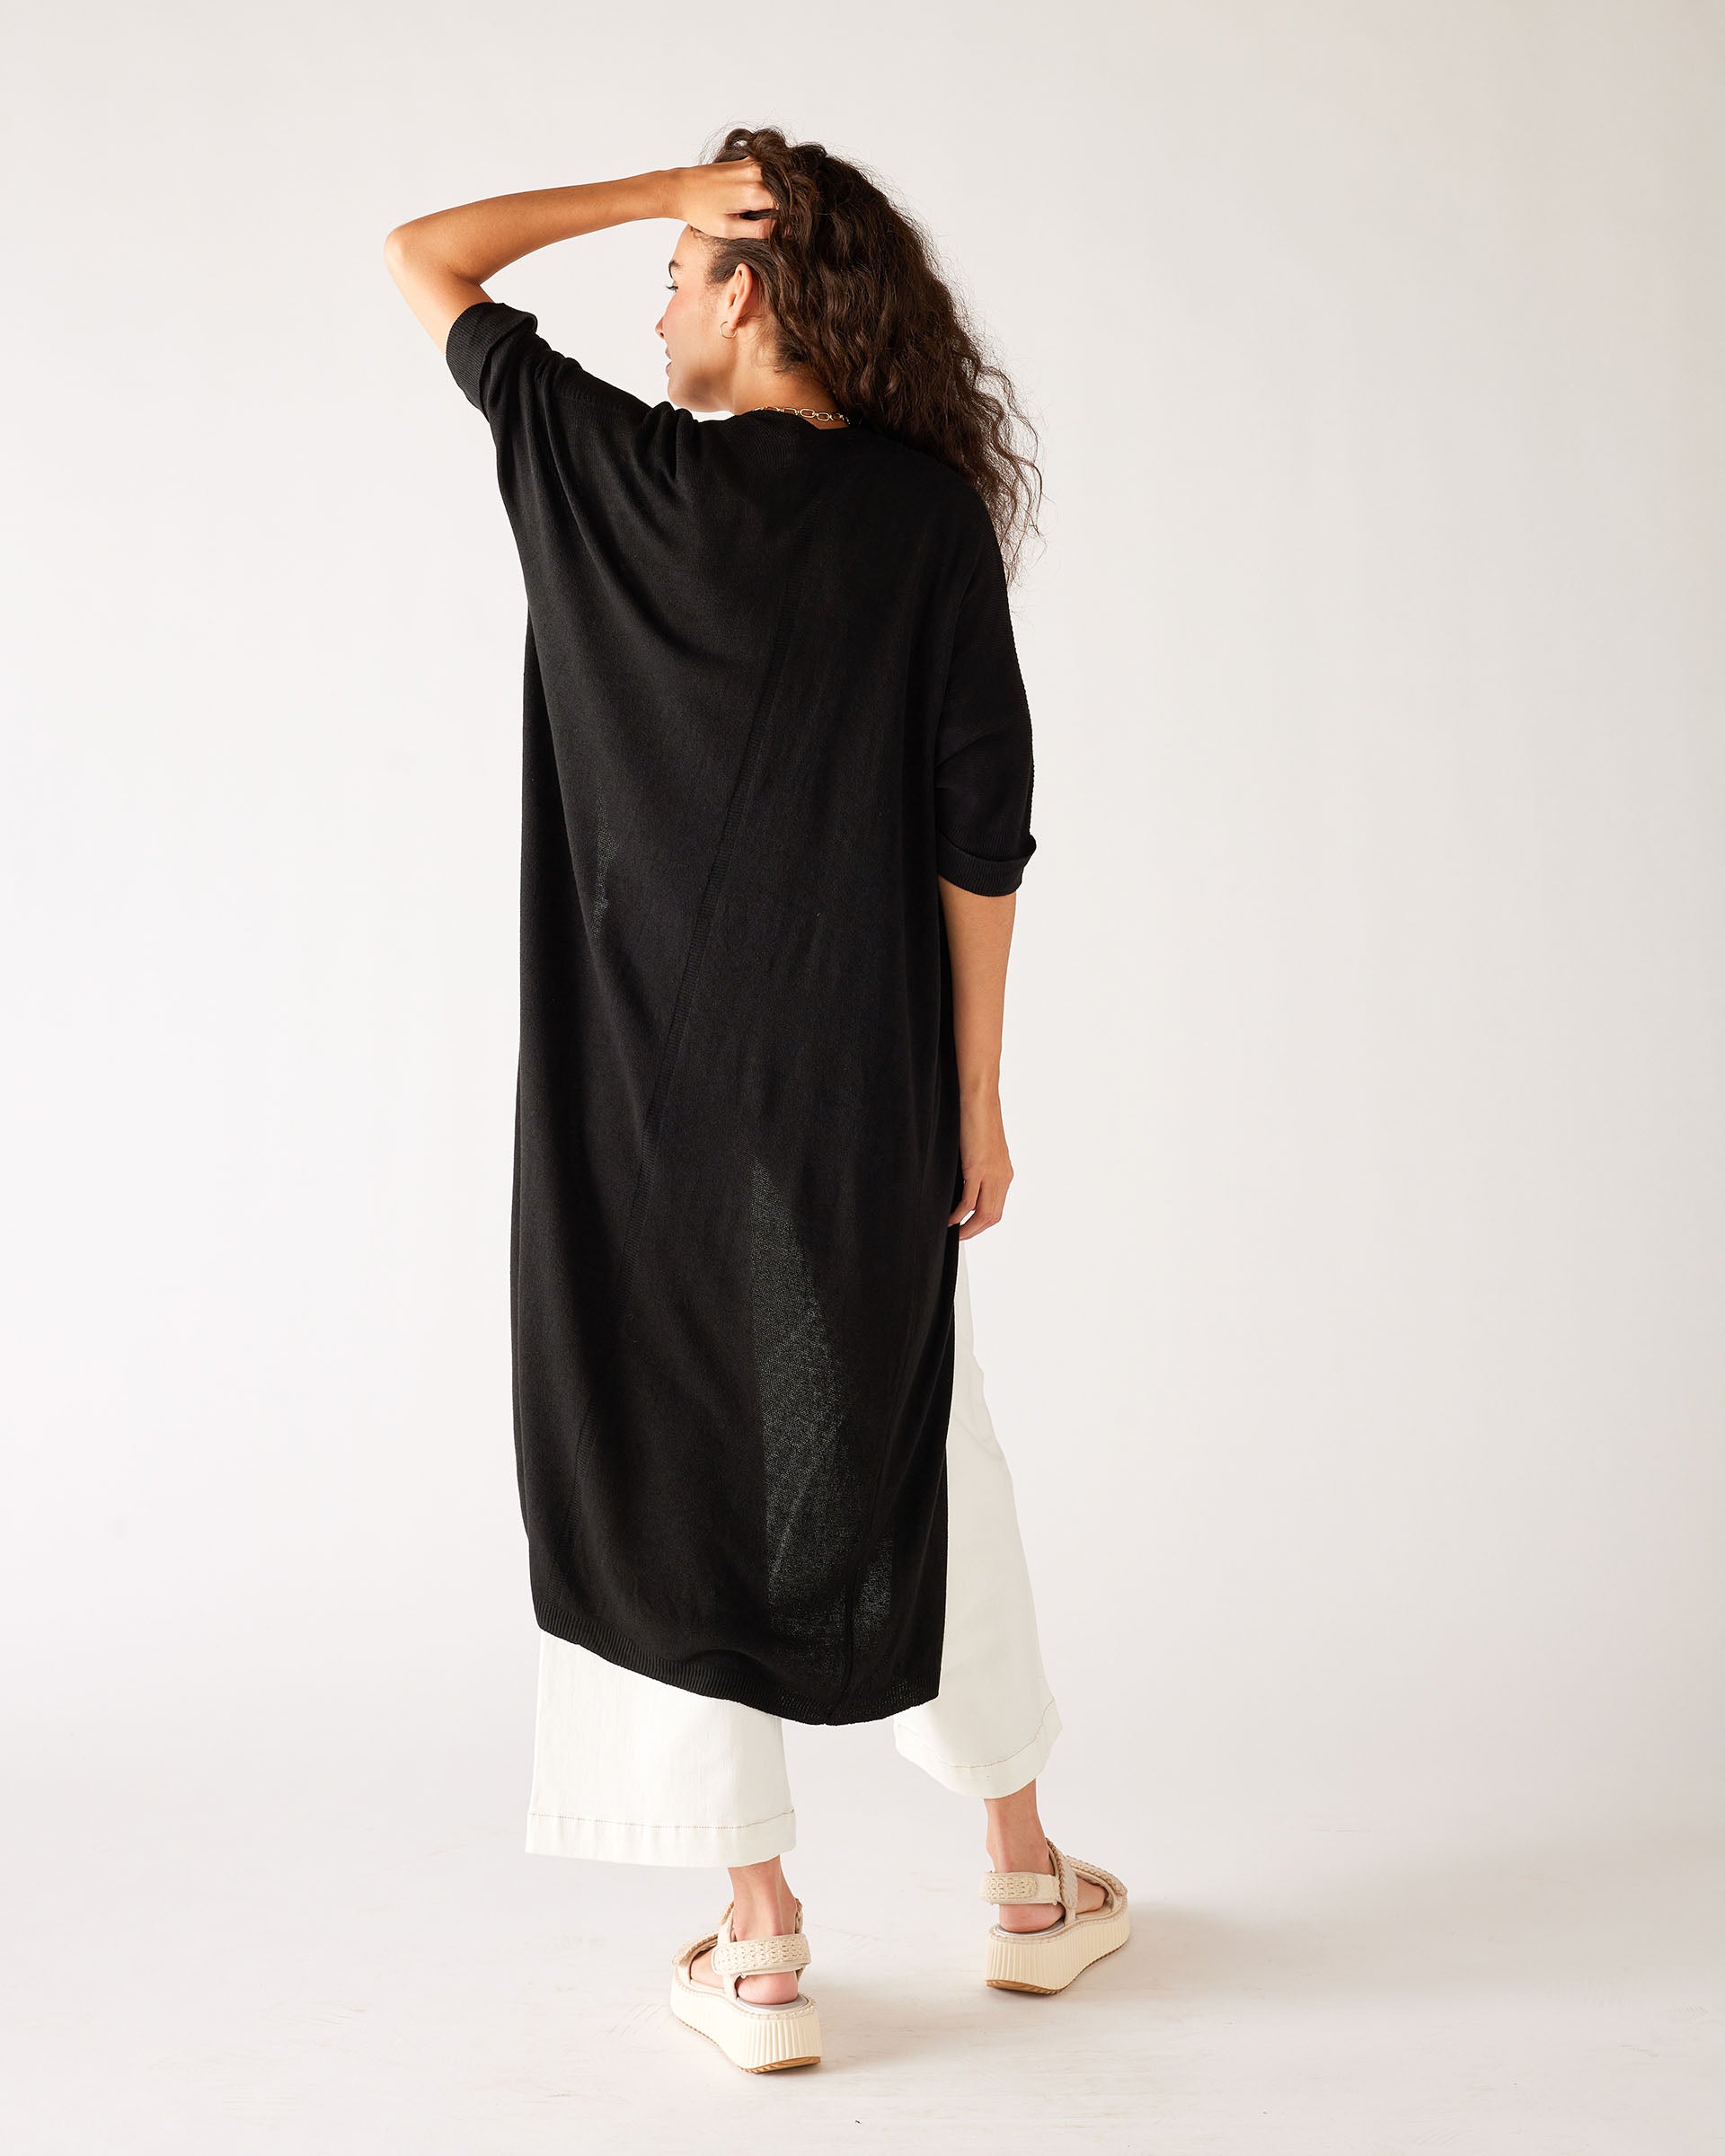 Womens Black Lightweight Cuffed Elbow Length Sleeves Duster Flowing Rear View Hand on Head